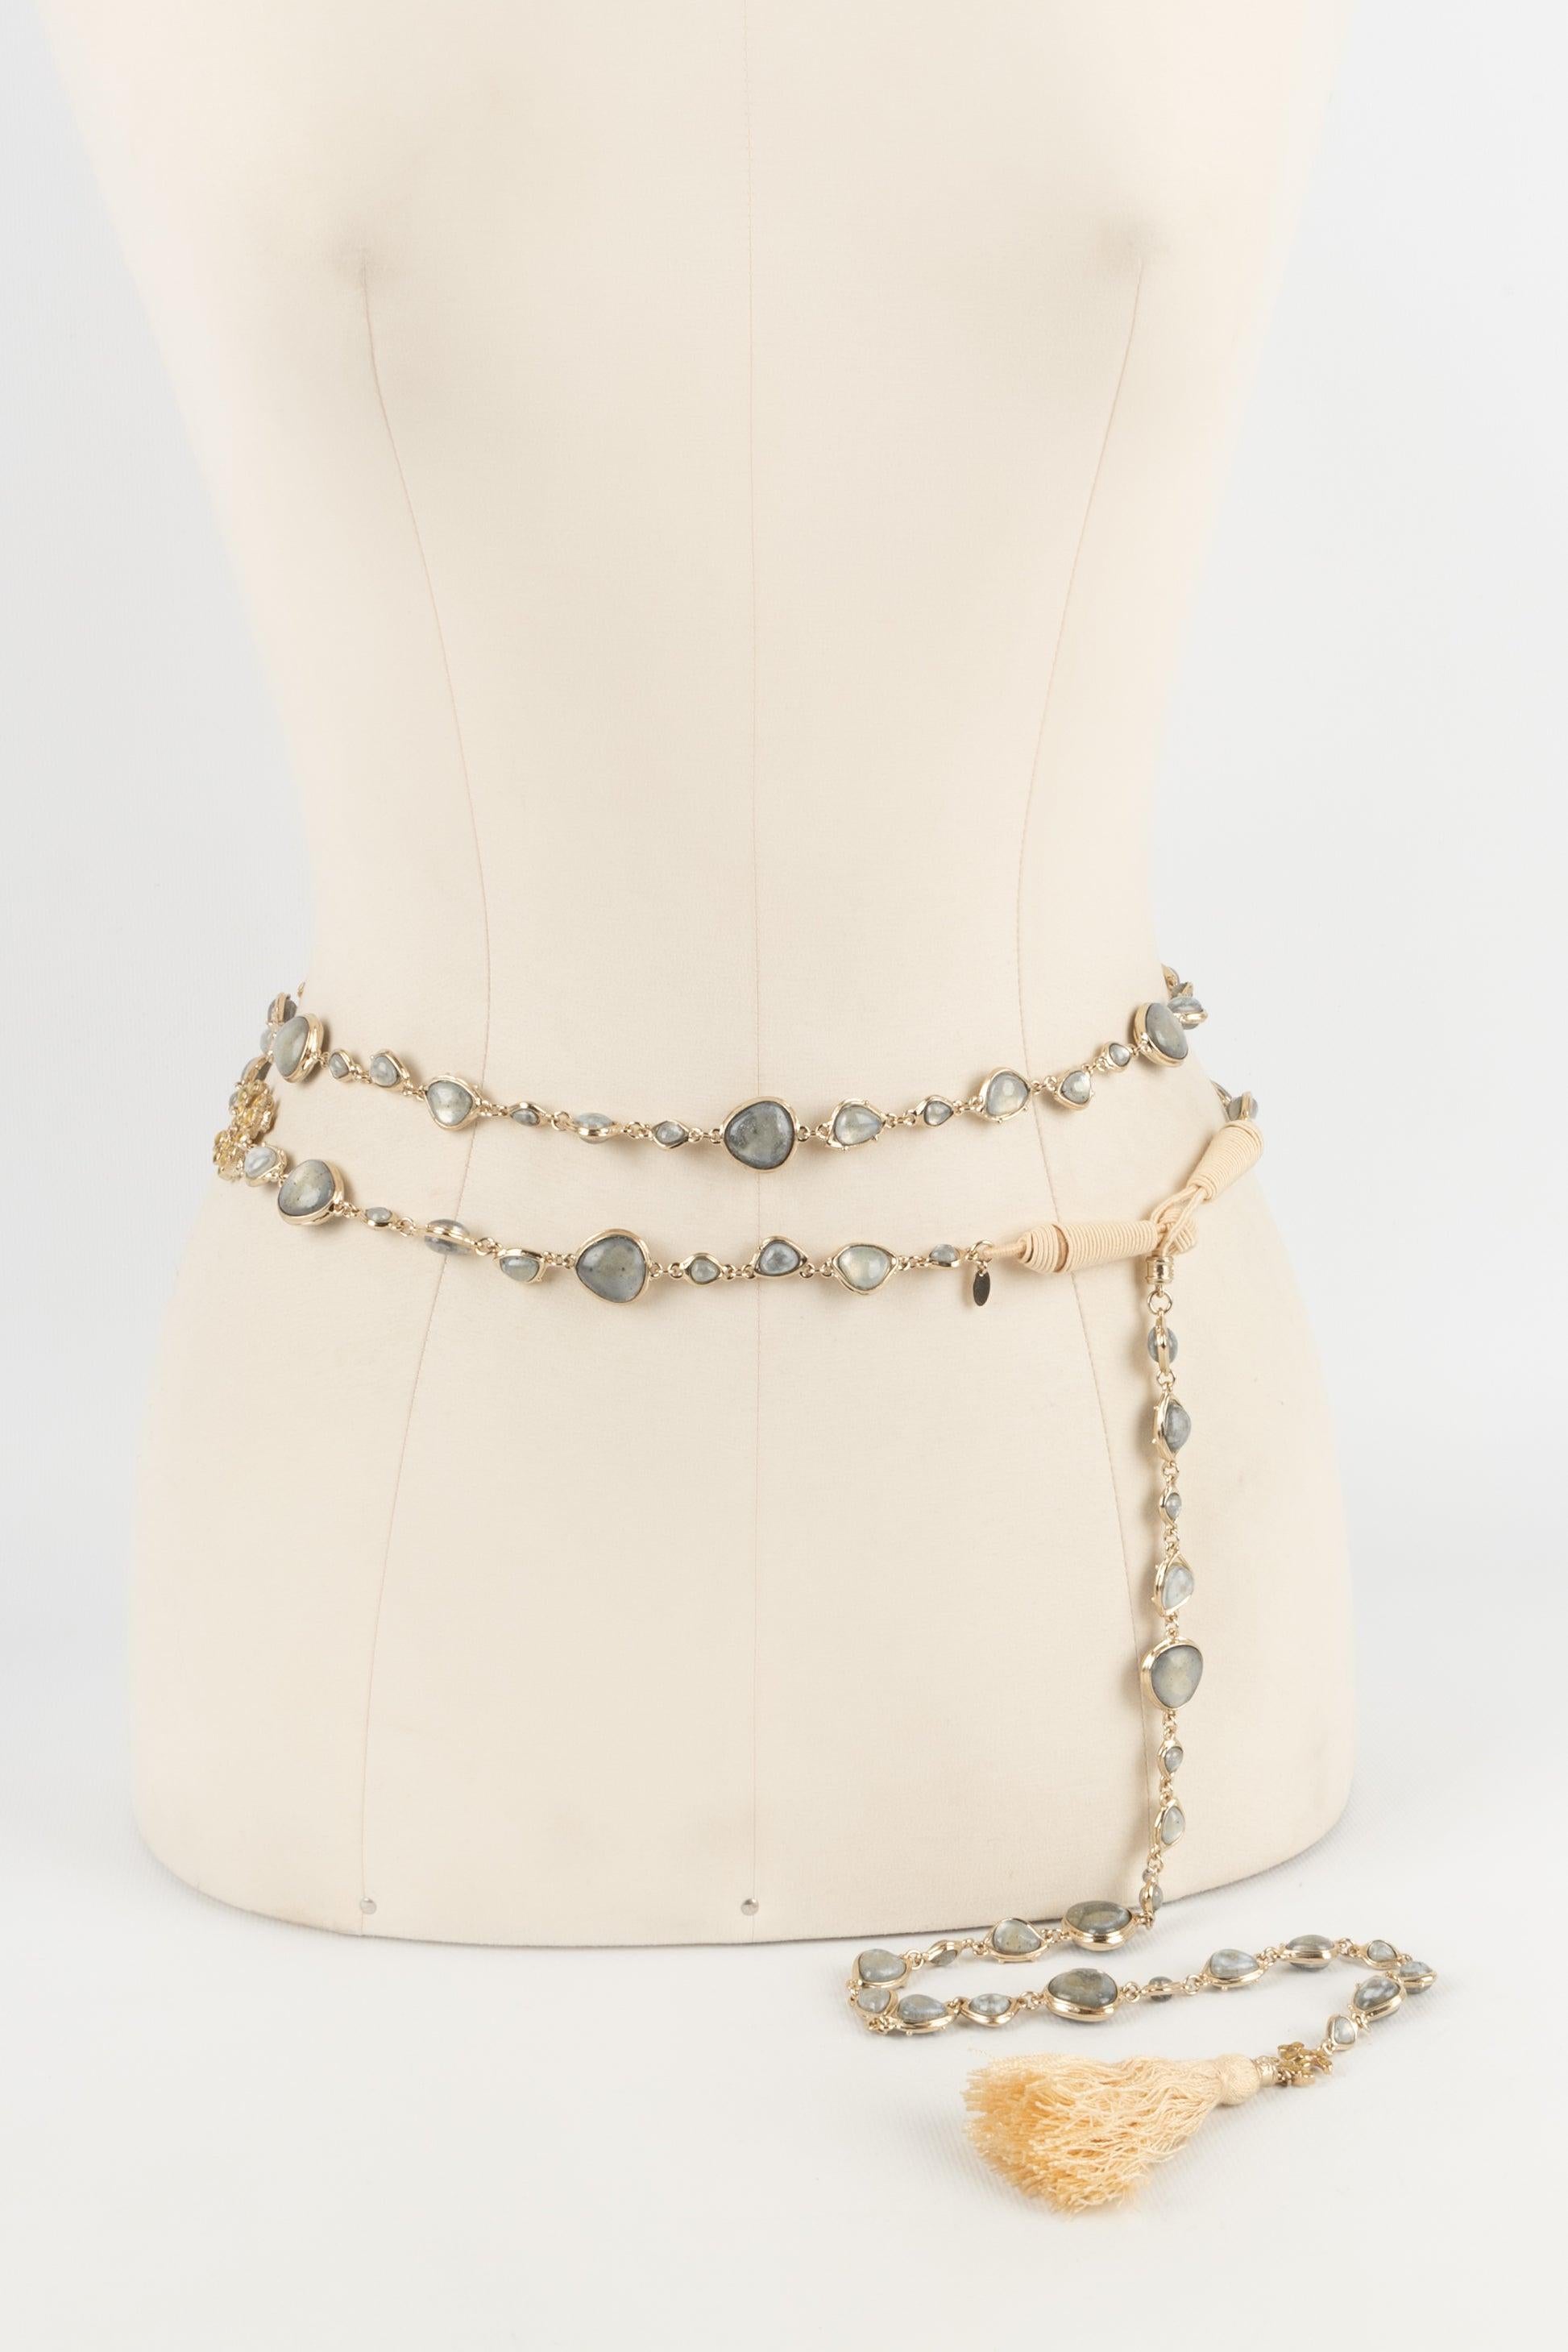 Chanel Champagne Metal Tie Necklace, 2012 1